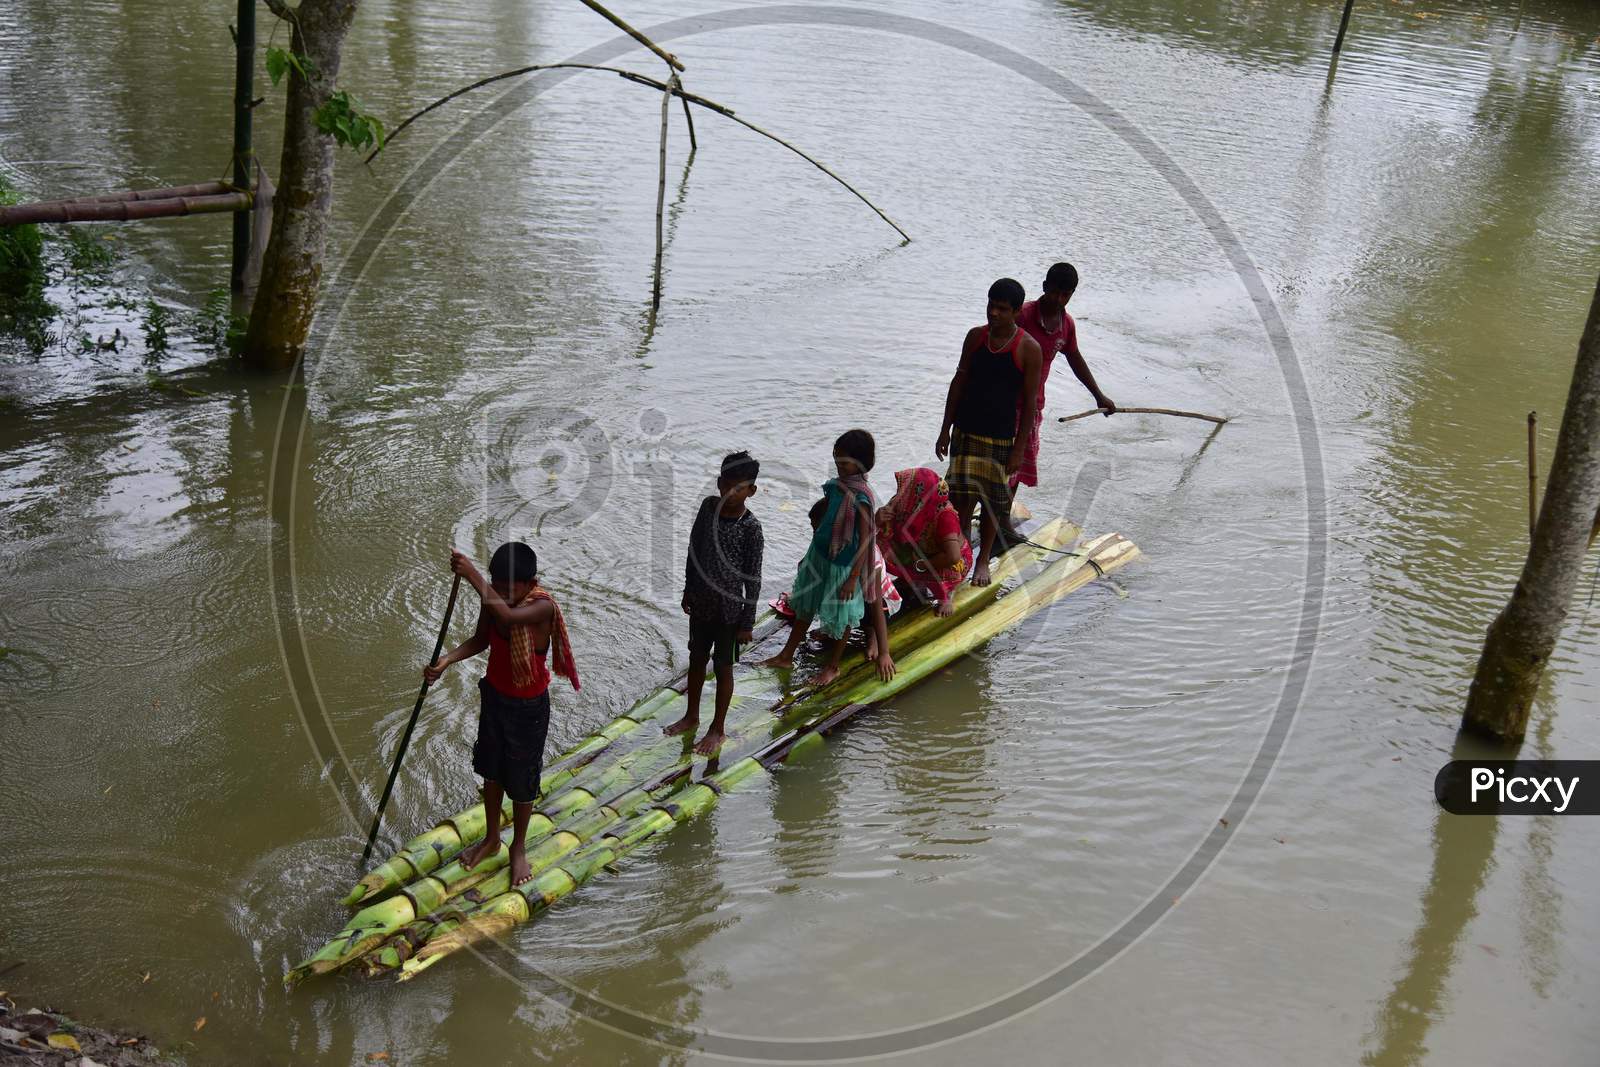 People wade through Floodwaters On A Makeshift Banana Raft Following Heavy Rainfall At Bhurbandha Village In Nagaon District Of Assam On June 27, 2020.